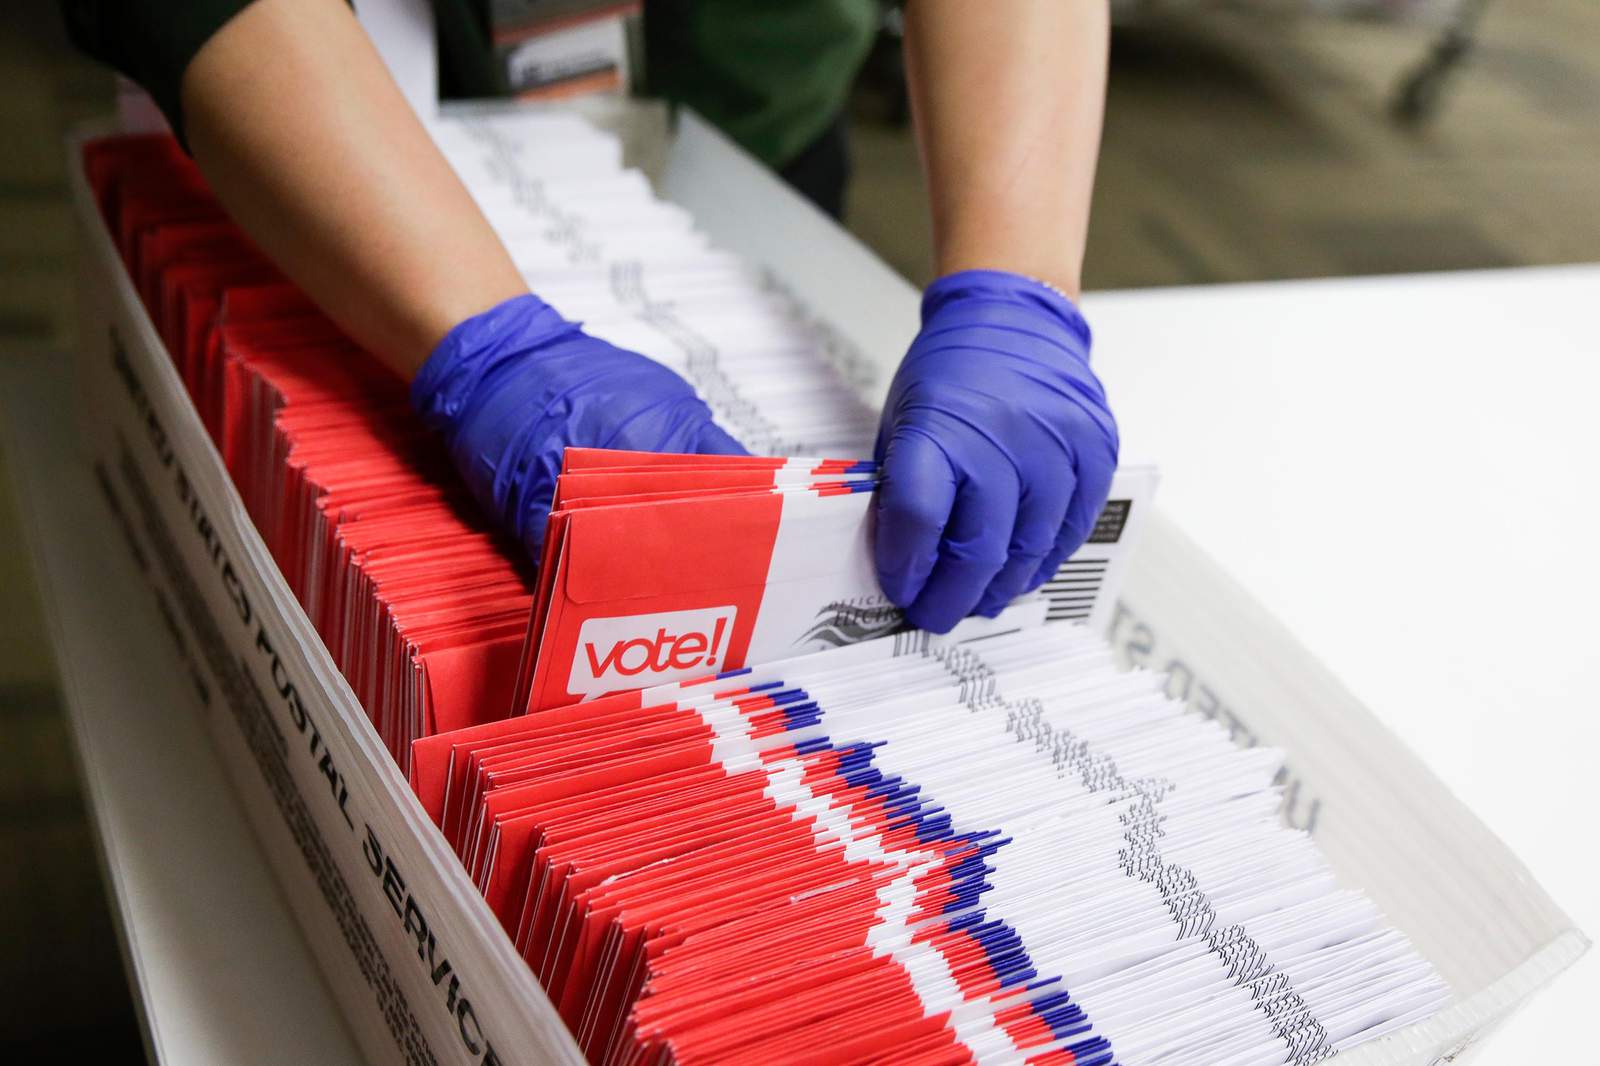 Amid pandemic, record number of Florida voters use mail-in ballots